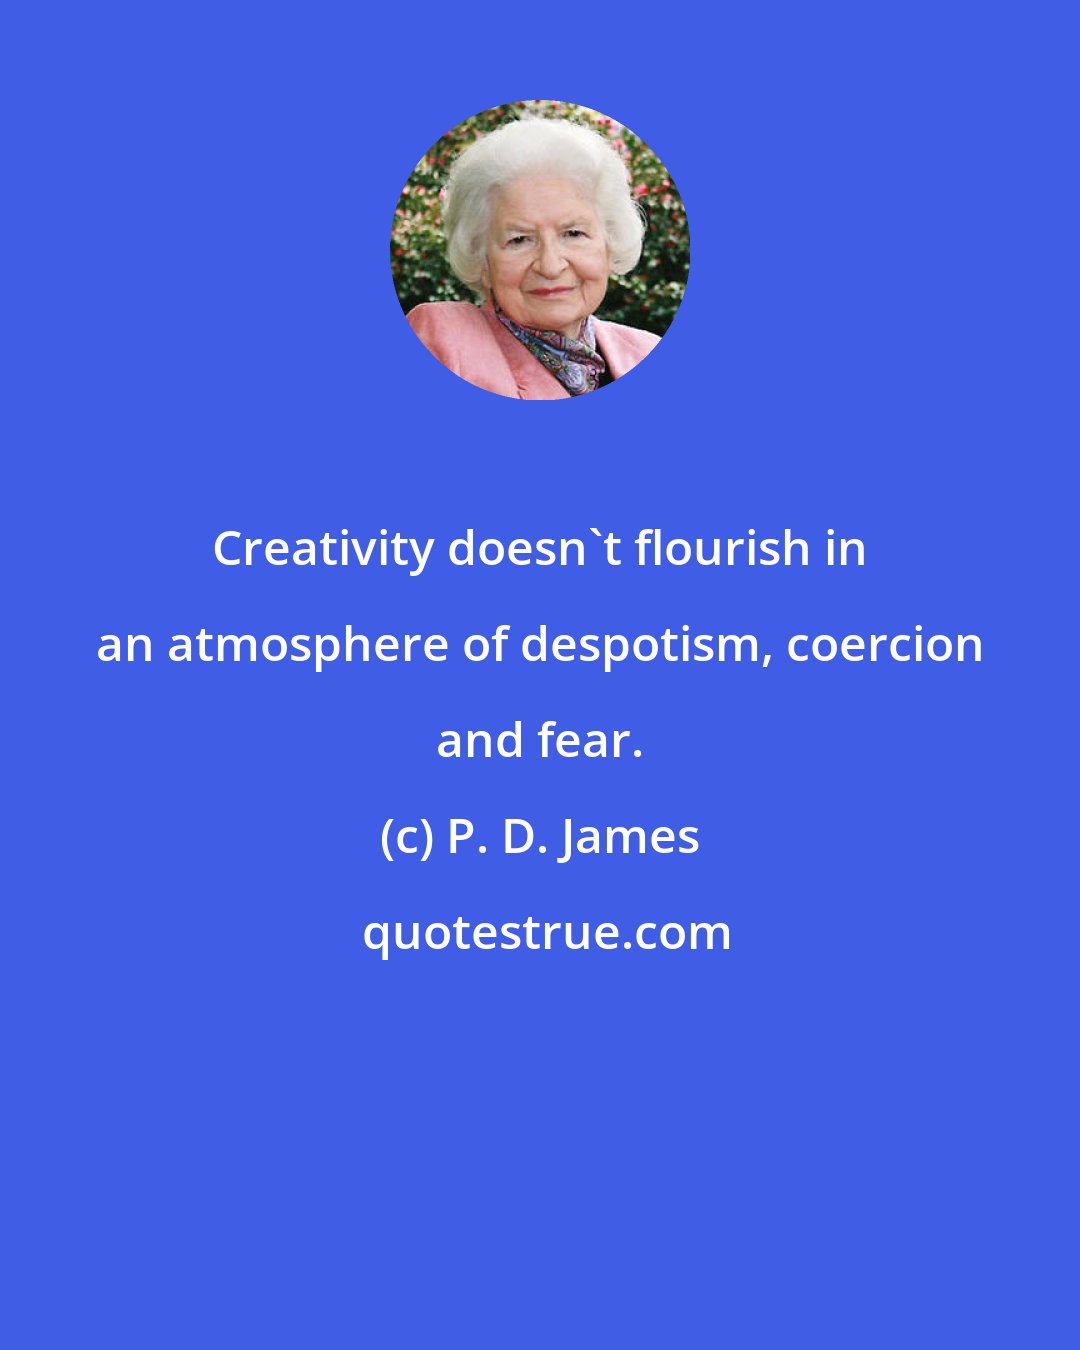 P. D. James: Creativity doesn't flourish in an atmosphere of despotism, coercion and fear.